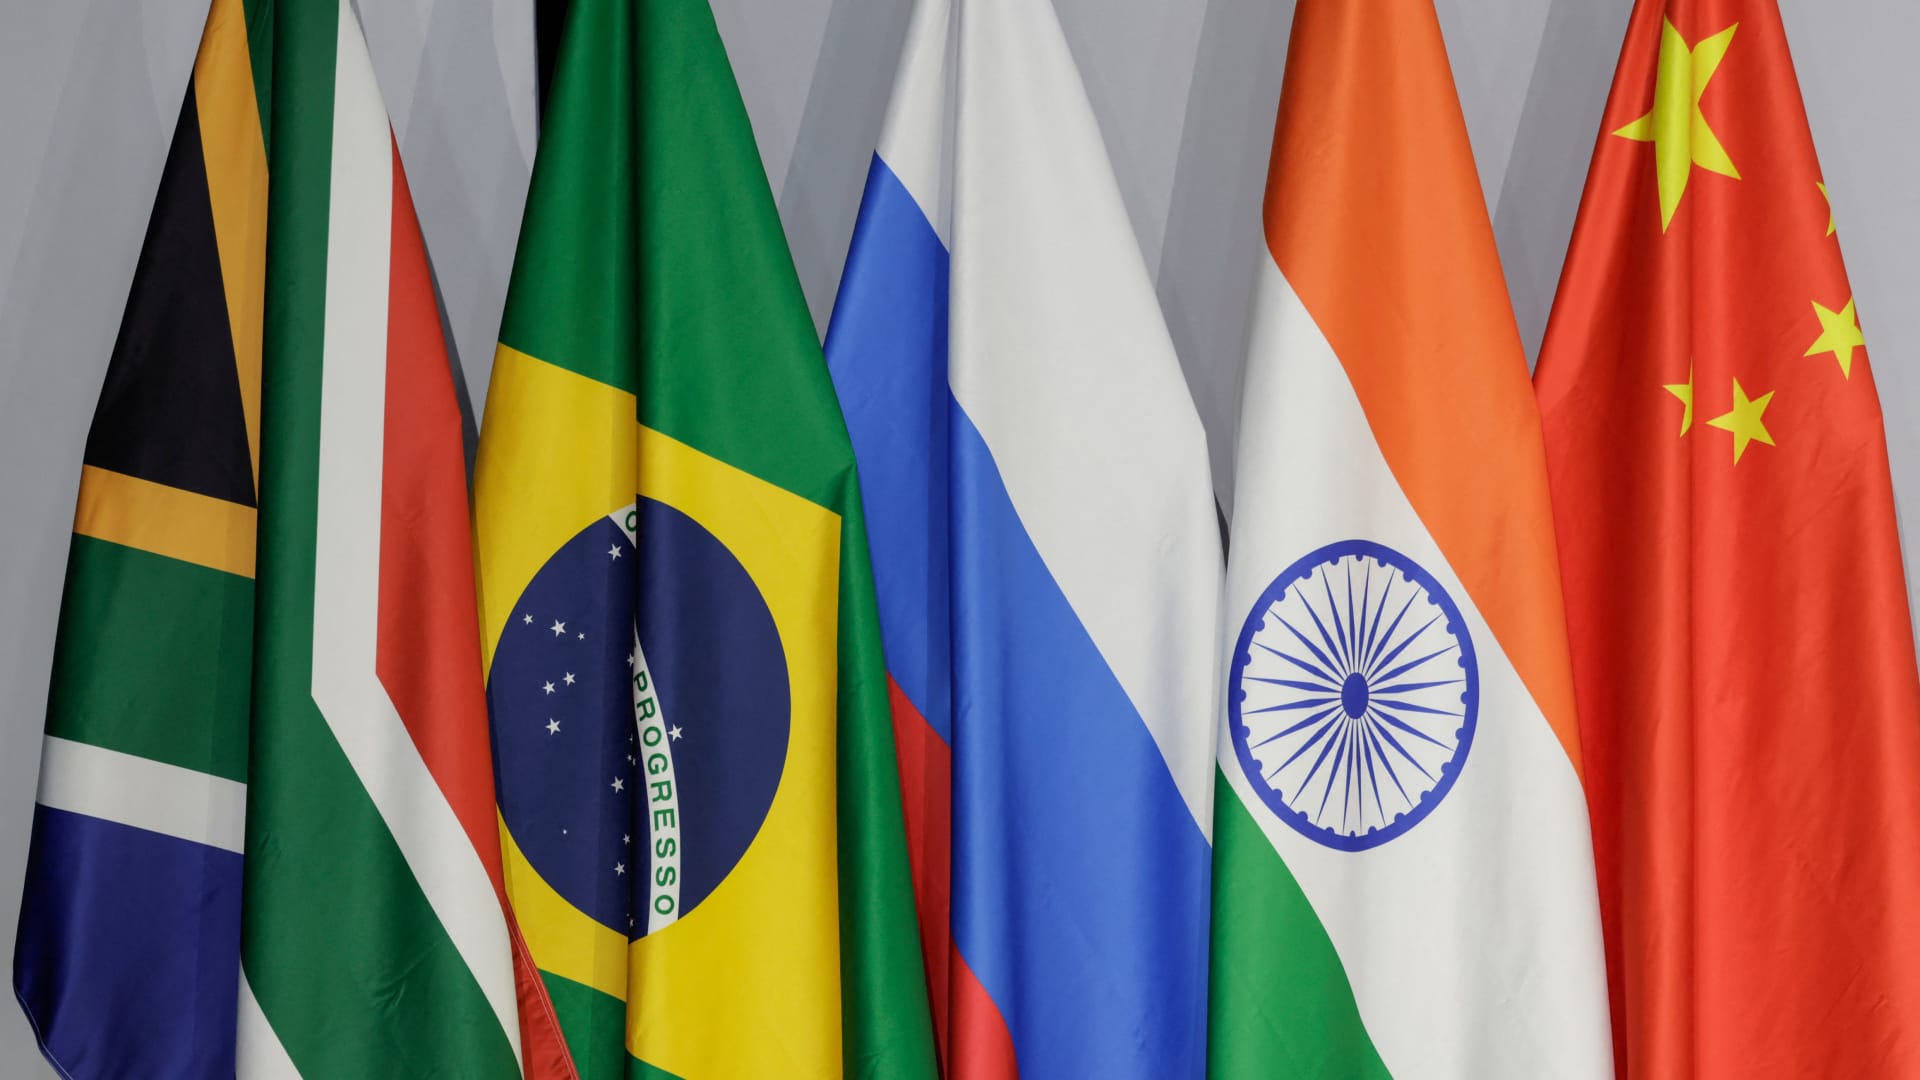 Western sanctions on Russia could push the BRICS alliance closer